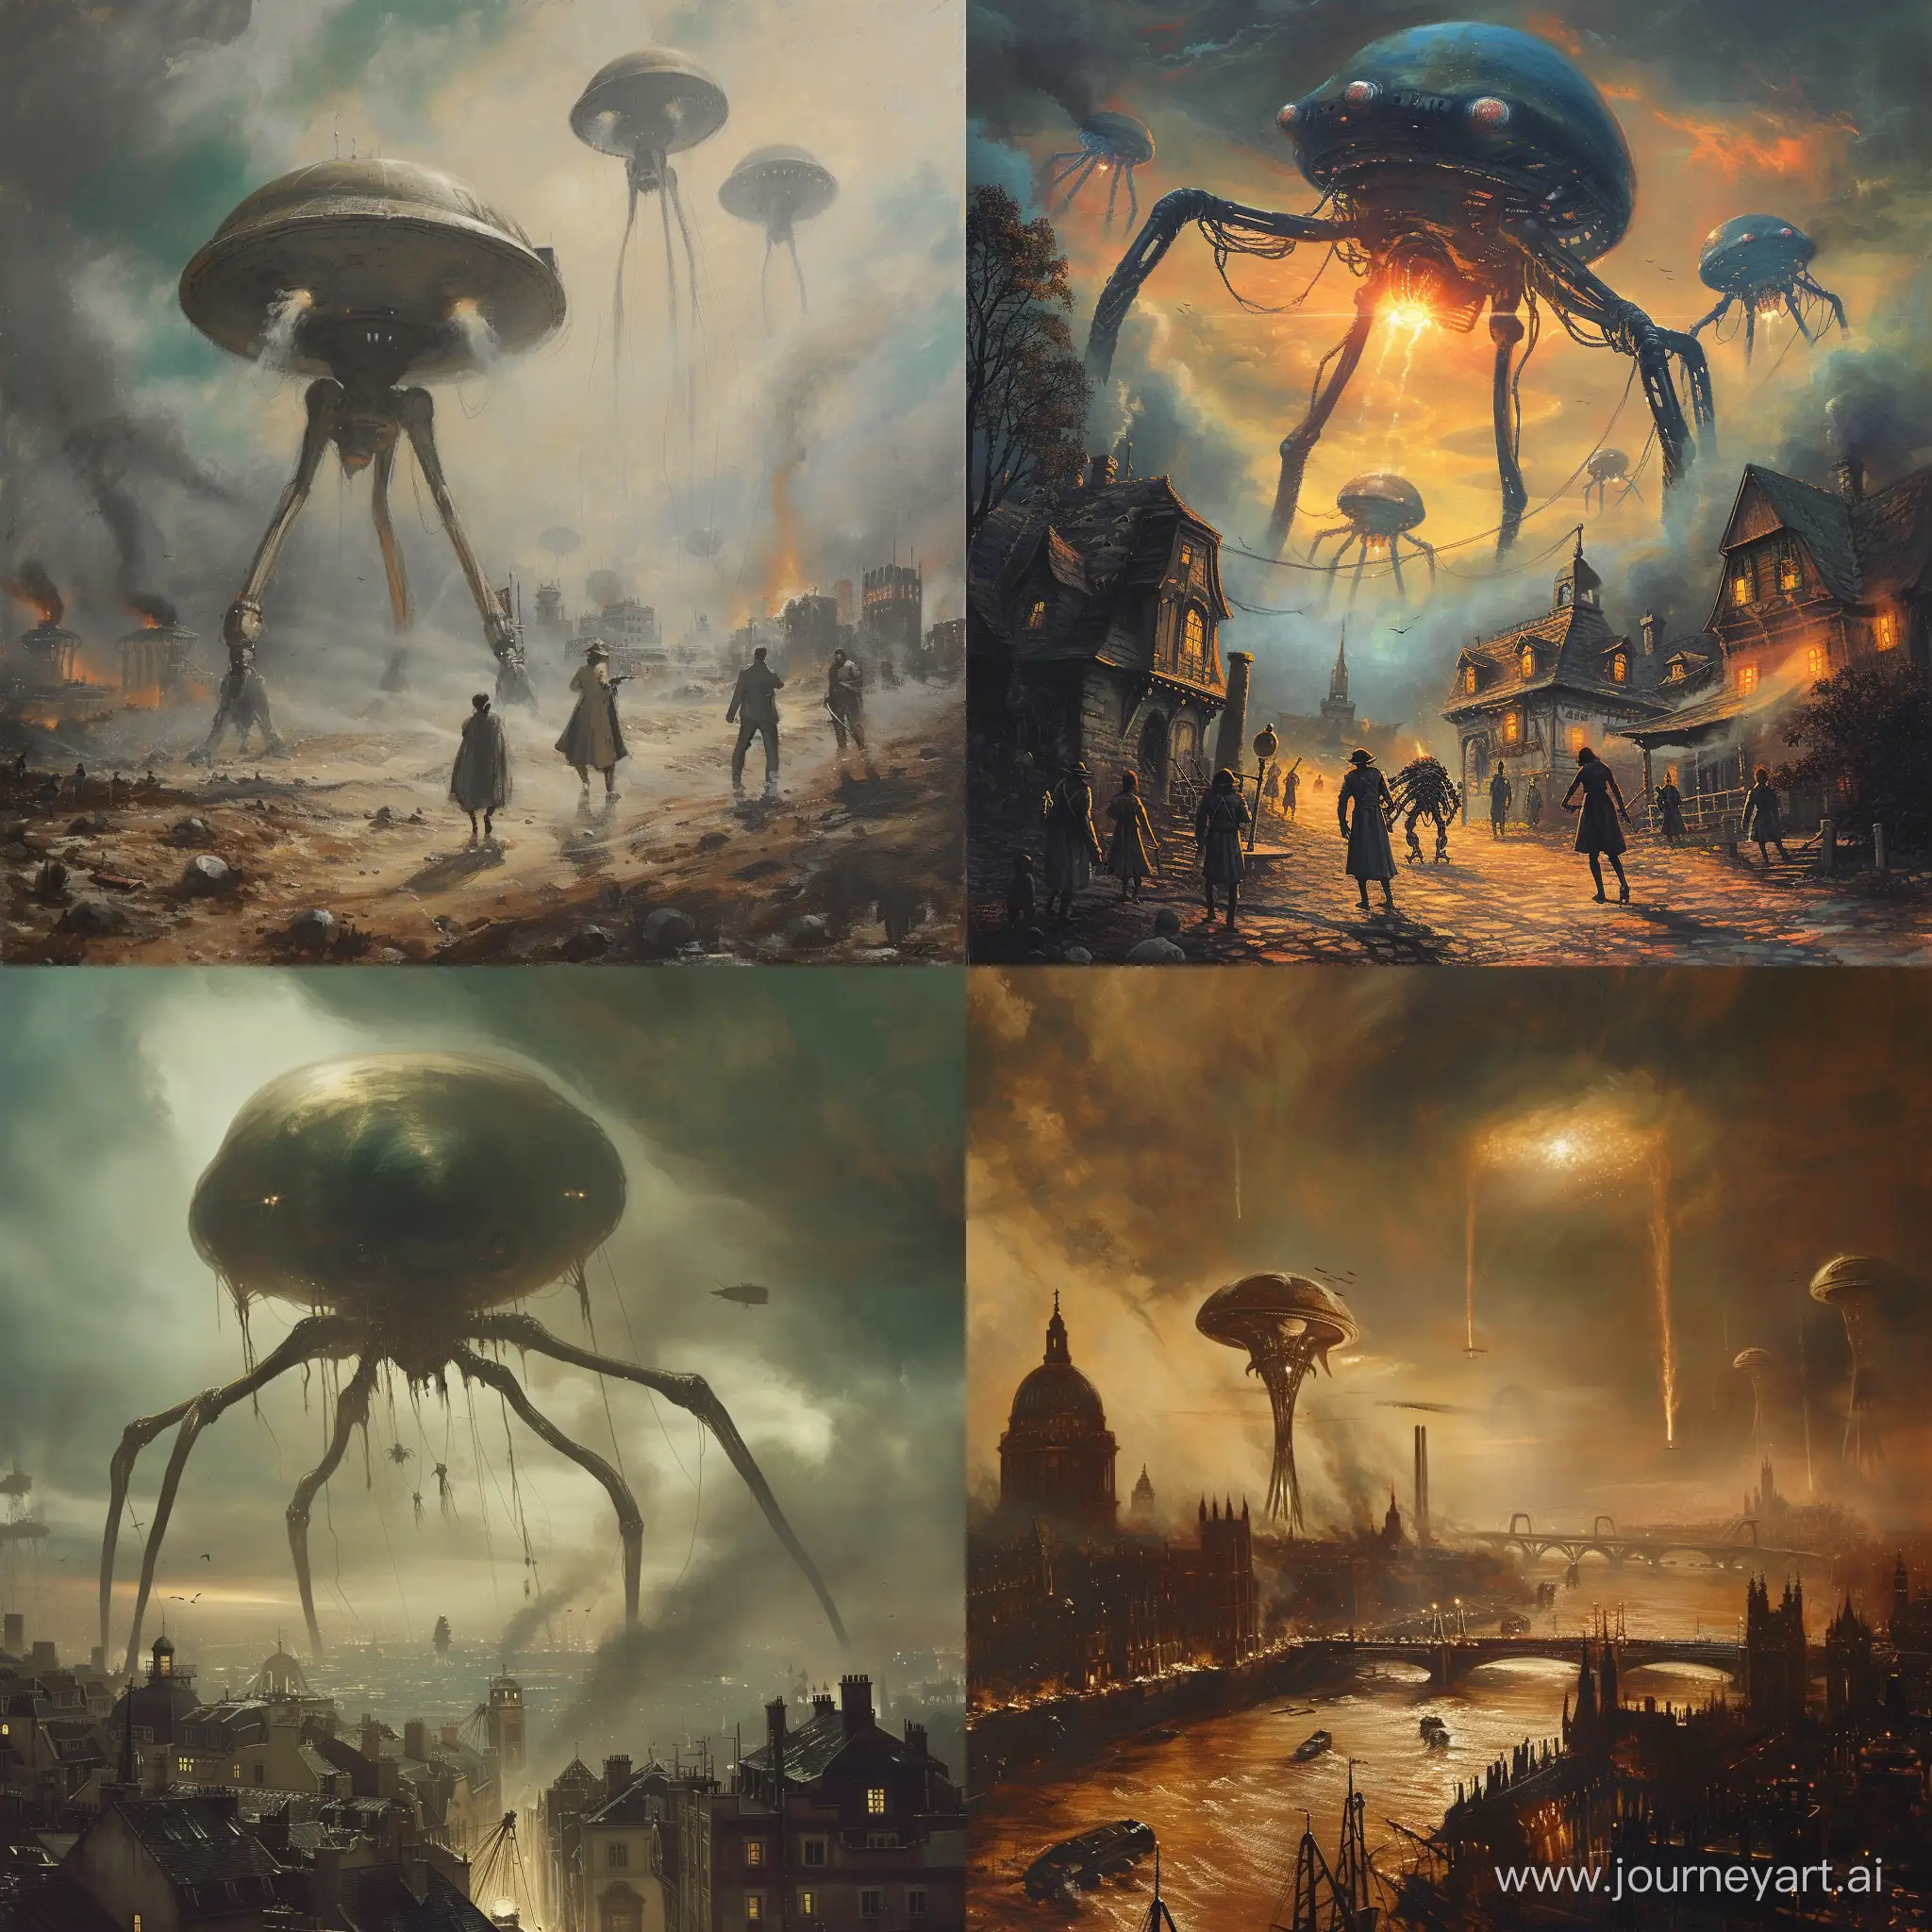 Epic-War-of-the-Worlds-Fantasy-Battle-Version-6-Art-with-Alien-Invaders